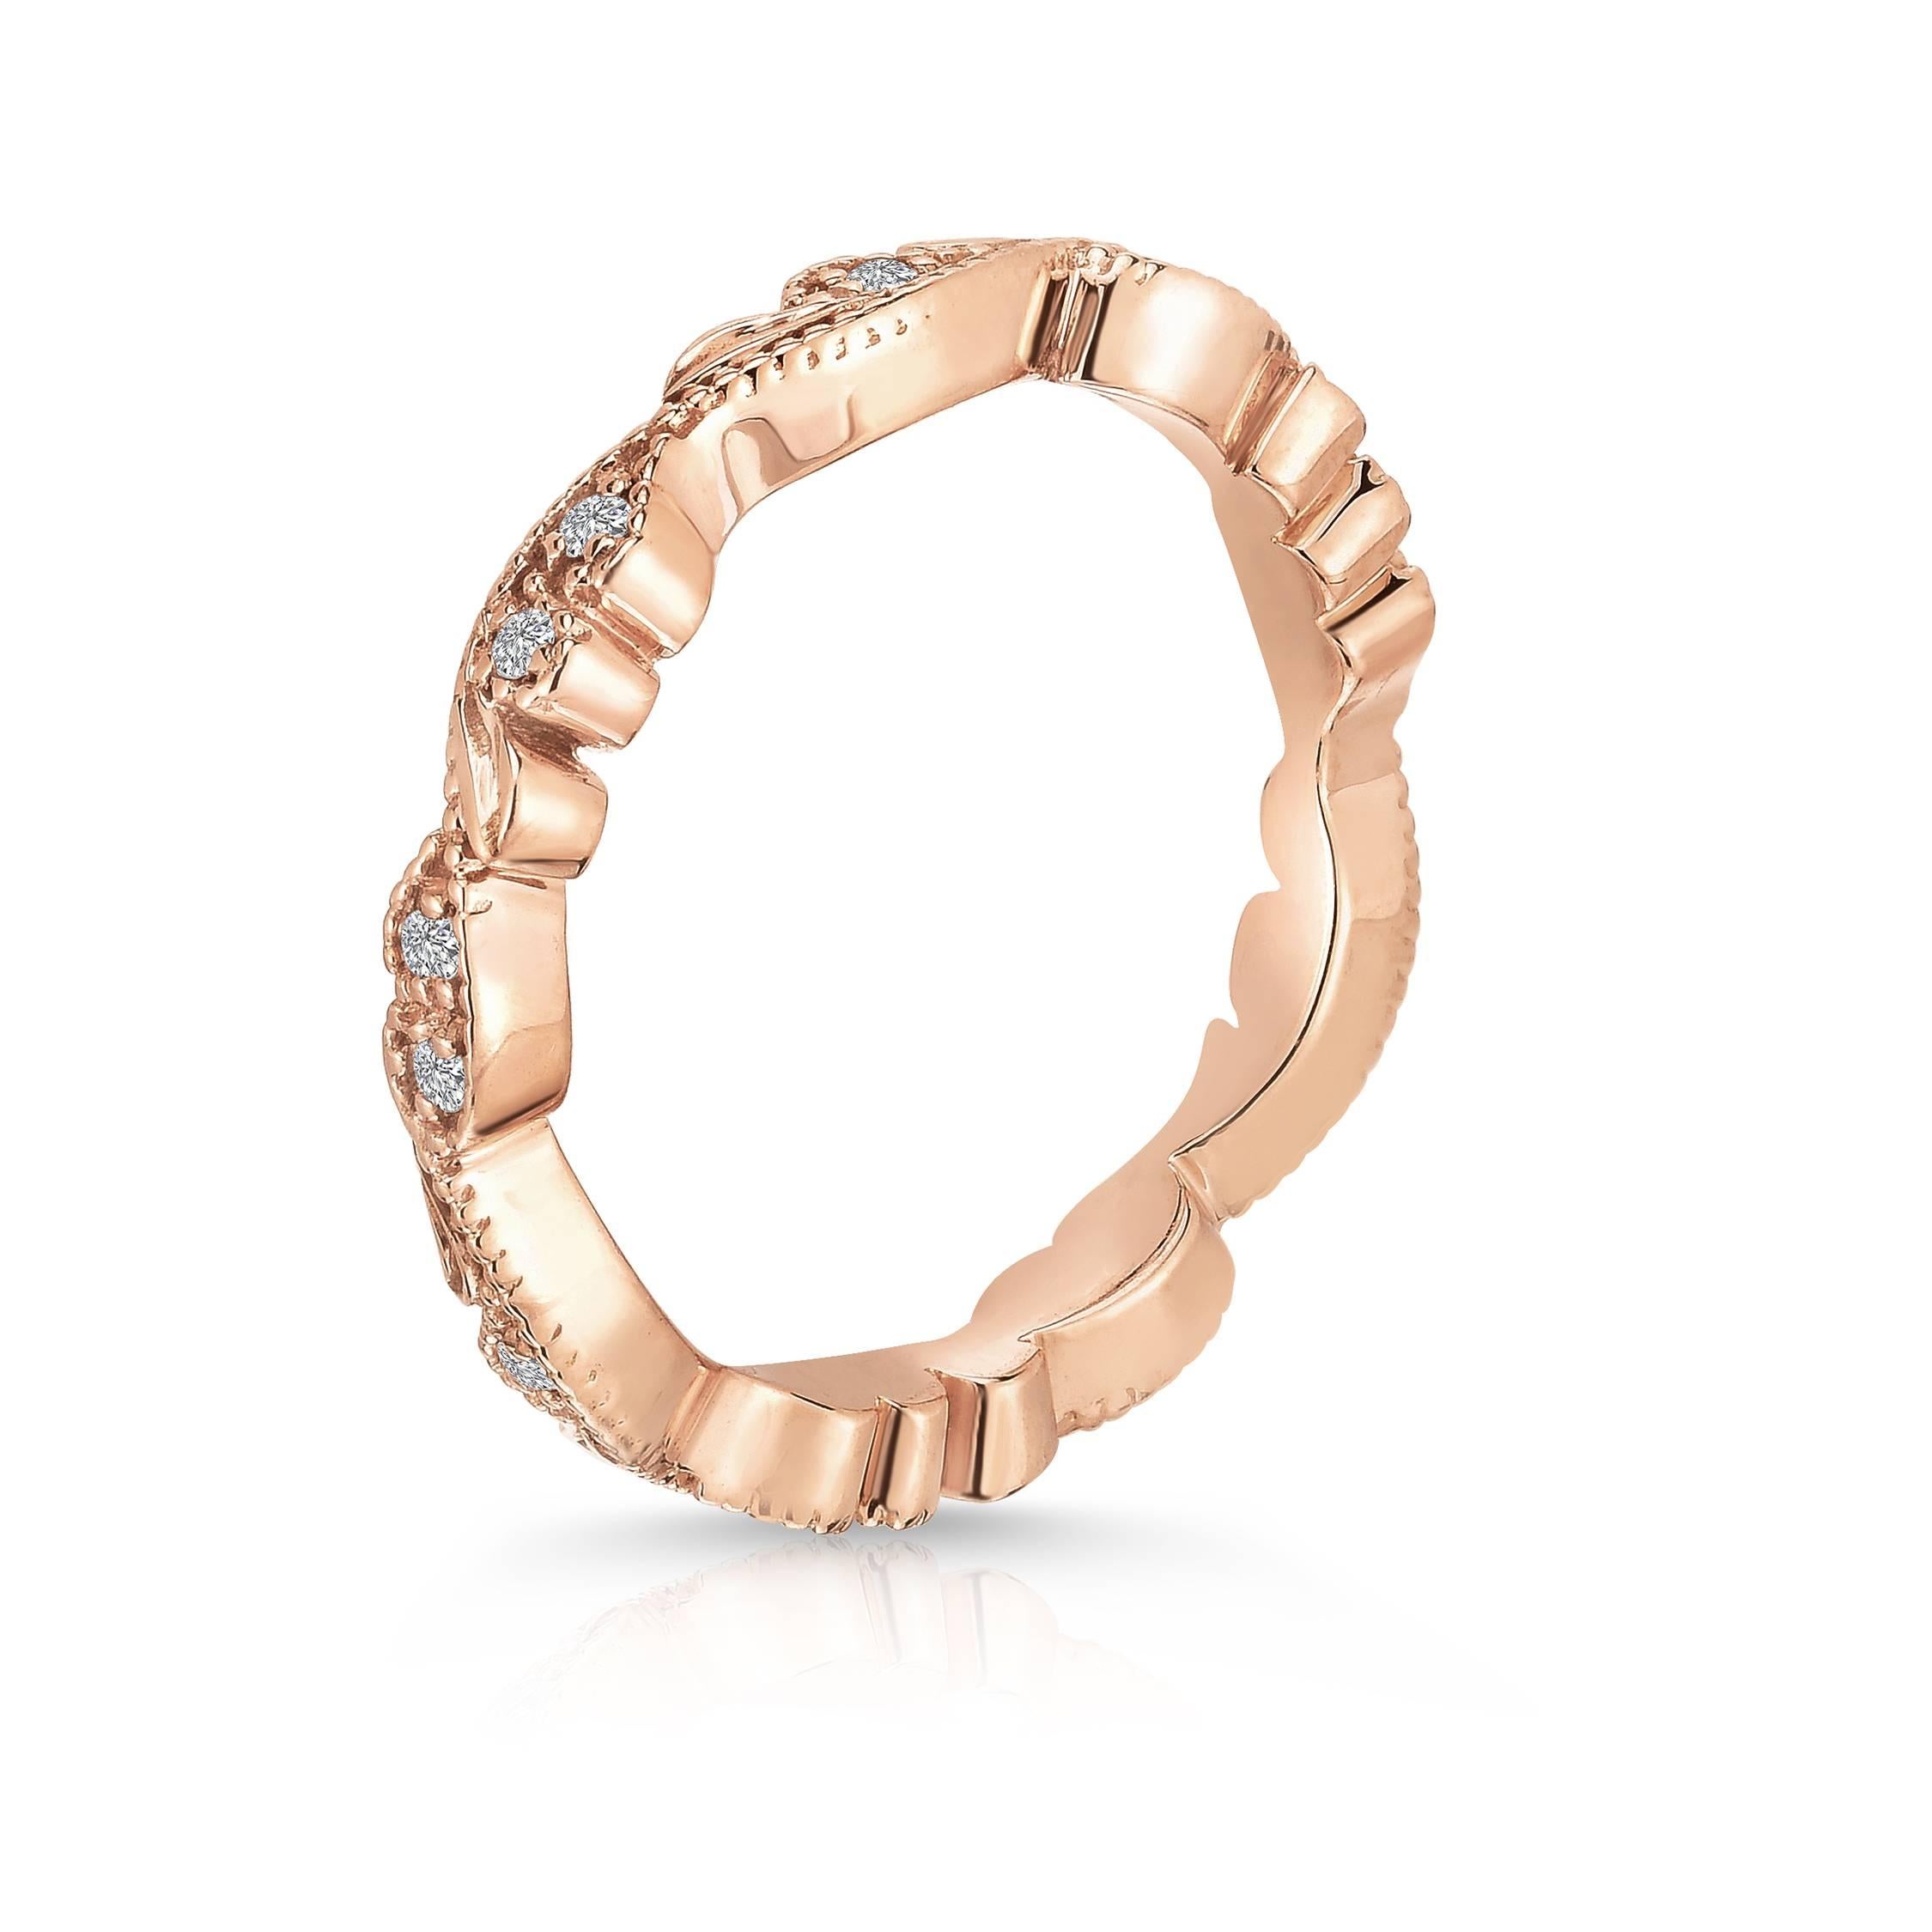 Marisa Perry's  Chantilly Lace inspired band ring with diamonds in 18k rose gold. Perfect as a wedding band and as a bridal band with matching engagement ring. This ring can be stacked with other bands or worn on its own.   

Hand crafted in New